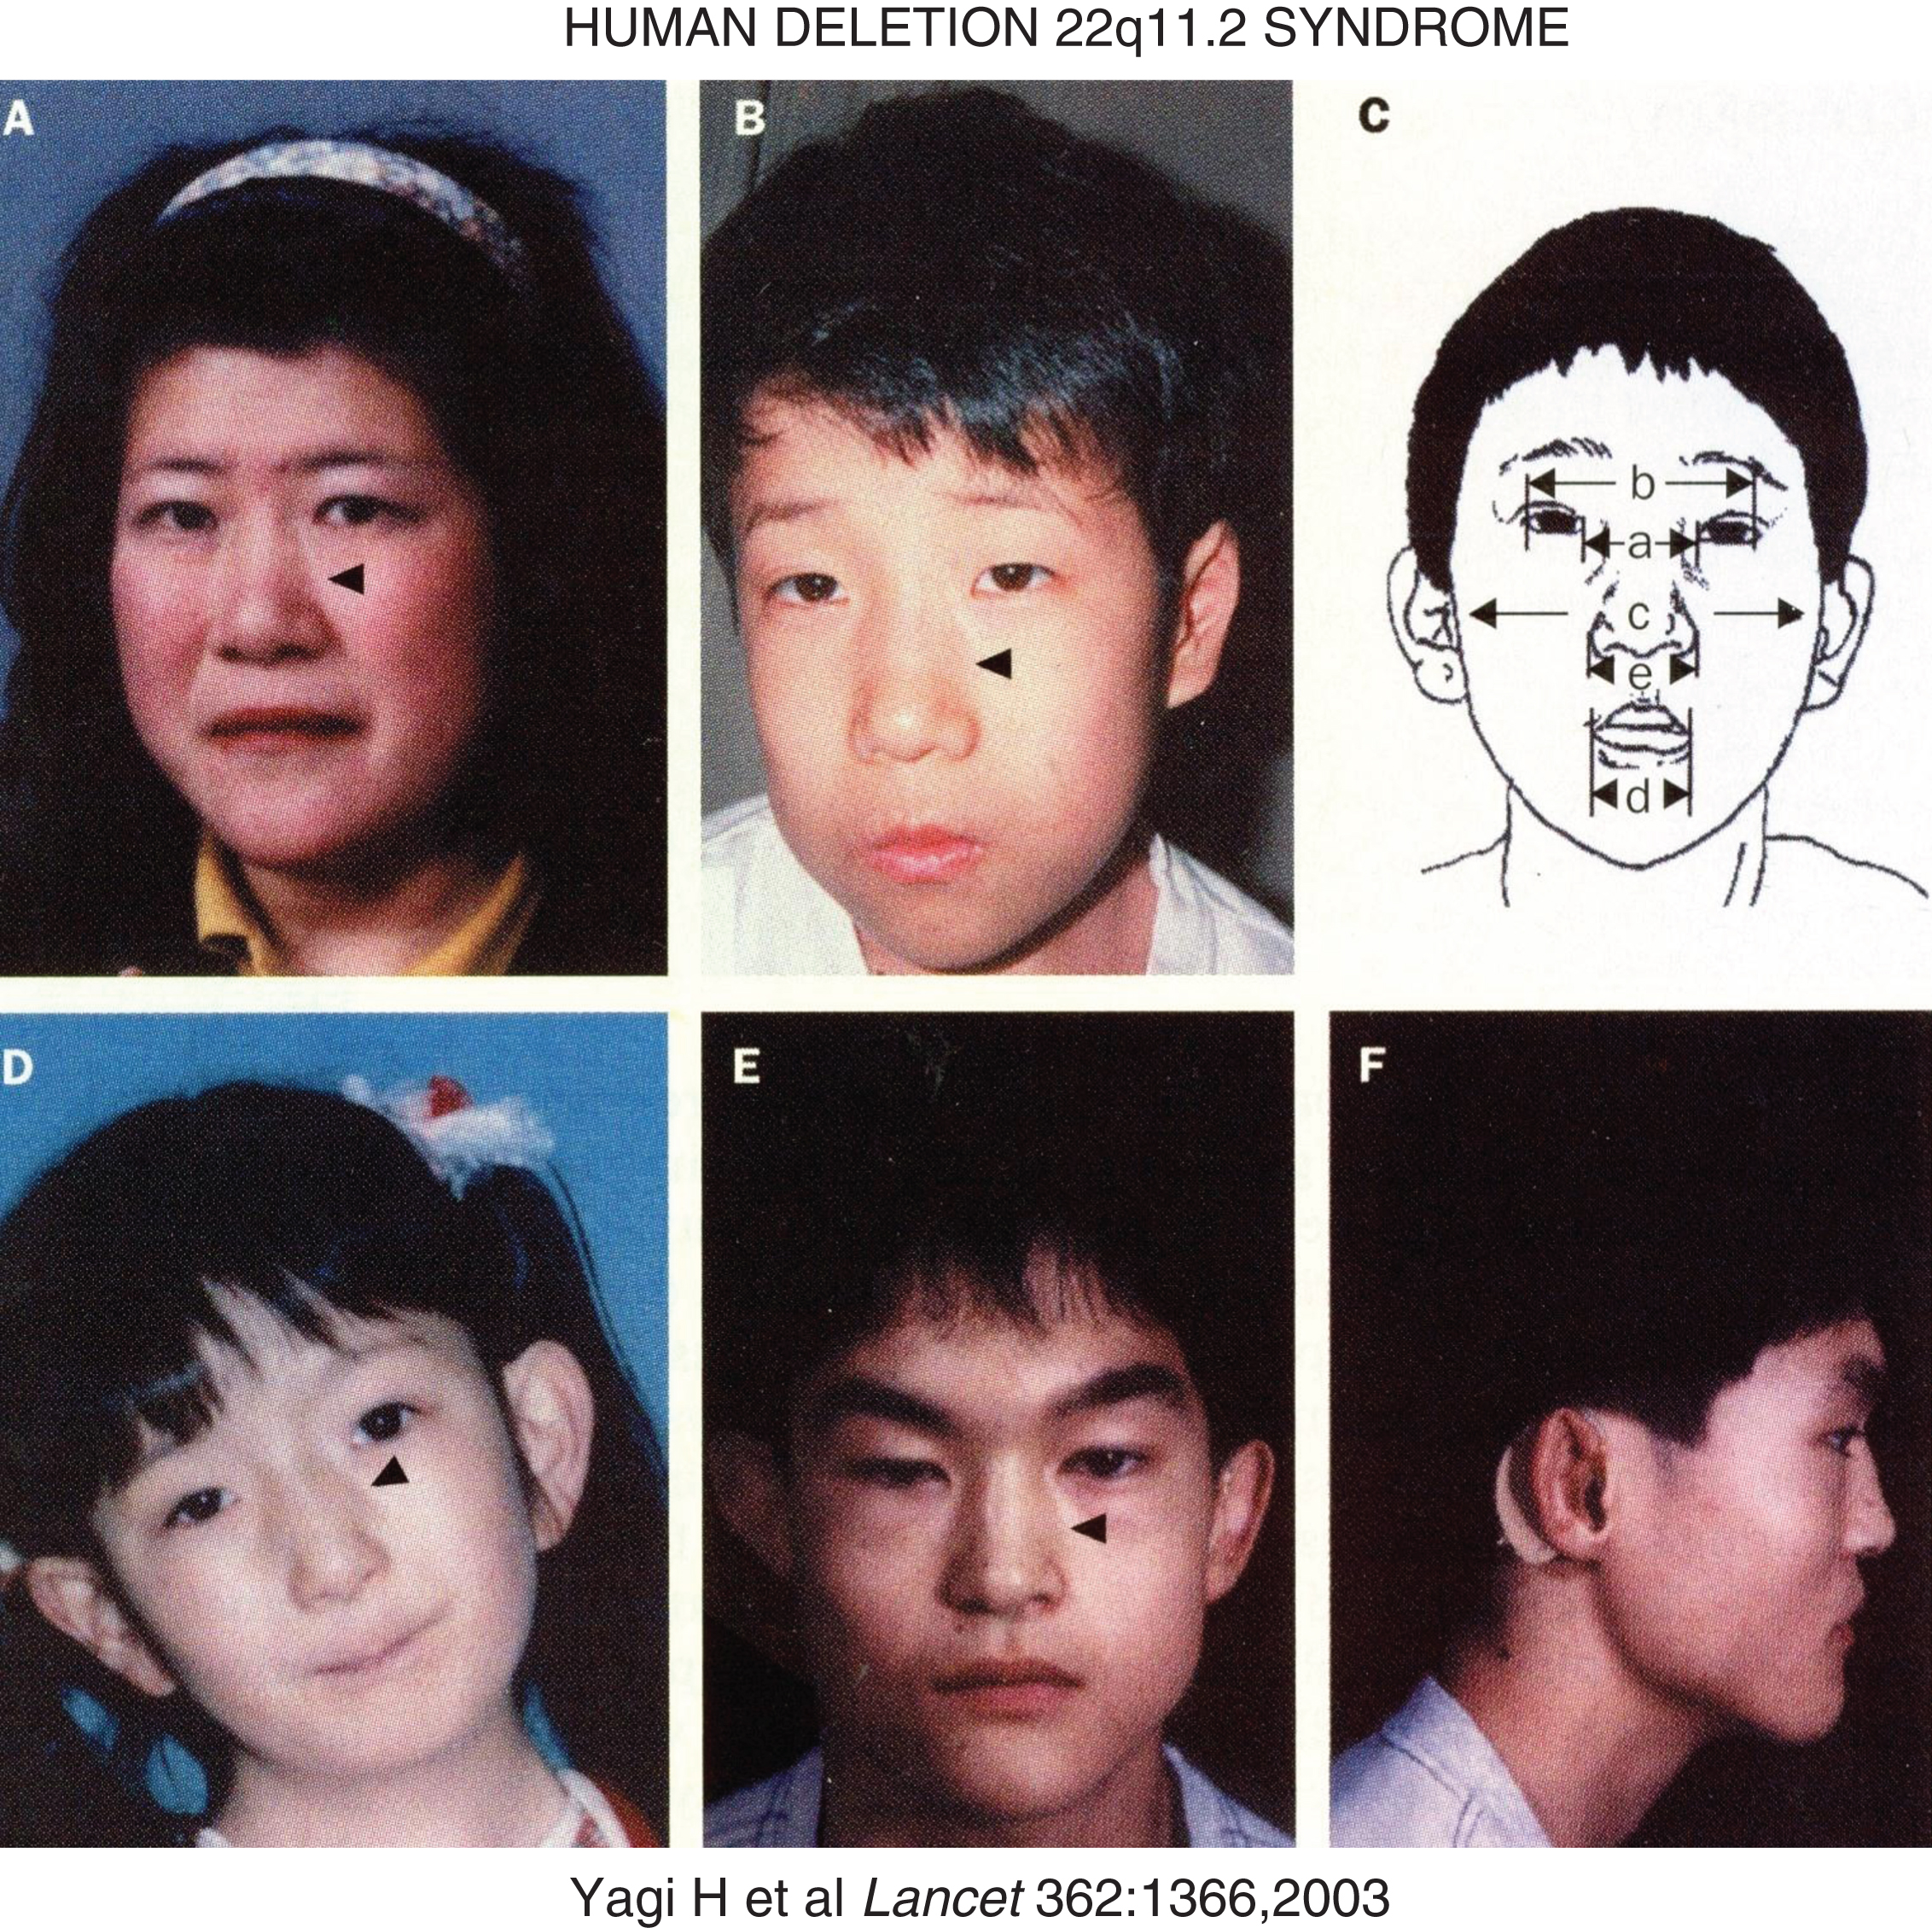 Facial characteristics of the deletion chromosome 22.q11 syndrome and/or mutations in TBX1. Panels A and B are mother and son – arrowheads point to the divide into upper and lower segments. Panel C schematically depicts a – ocular hypertelorism; b – short palpebral fissures; d – small mouth (a – inner canthal distance; b – outer canthal distance; c – transverse facial width; d – oral width; e – nasal width). Panel D depicts the face of a patient with conotruncal anomaly face syndrome, intact chromosome 22q11, mutation in TBX1. Panels E and F display frontal and lateral views of a patient with the DiGeorge syndrome, intact chromosome 22q11, and mutation in TBX1. (Reproduced with permission from Yagi H, Furutani Y, Hamada H, et al. Role of TBX1 in human del22q11.2 syndrome. Lancet 362:1366-1373,2003.)